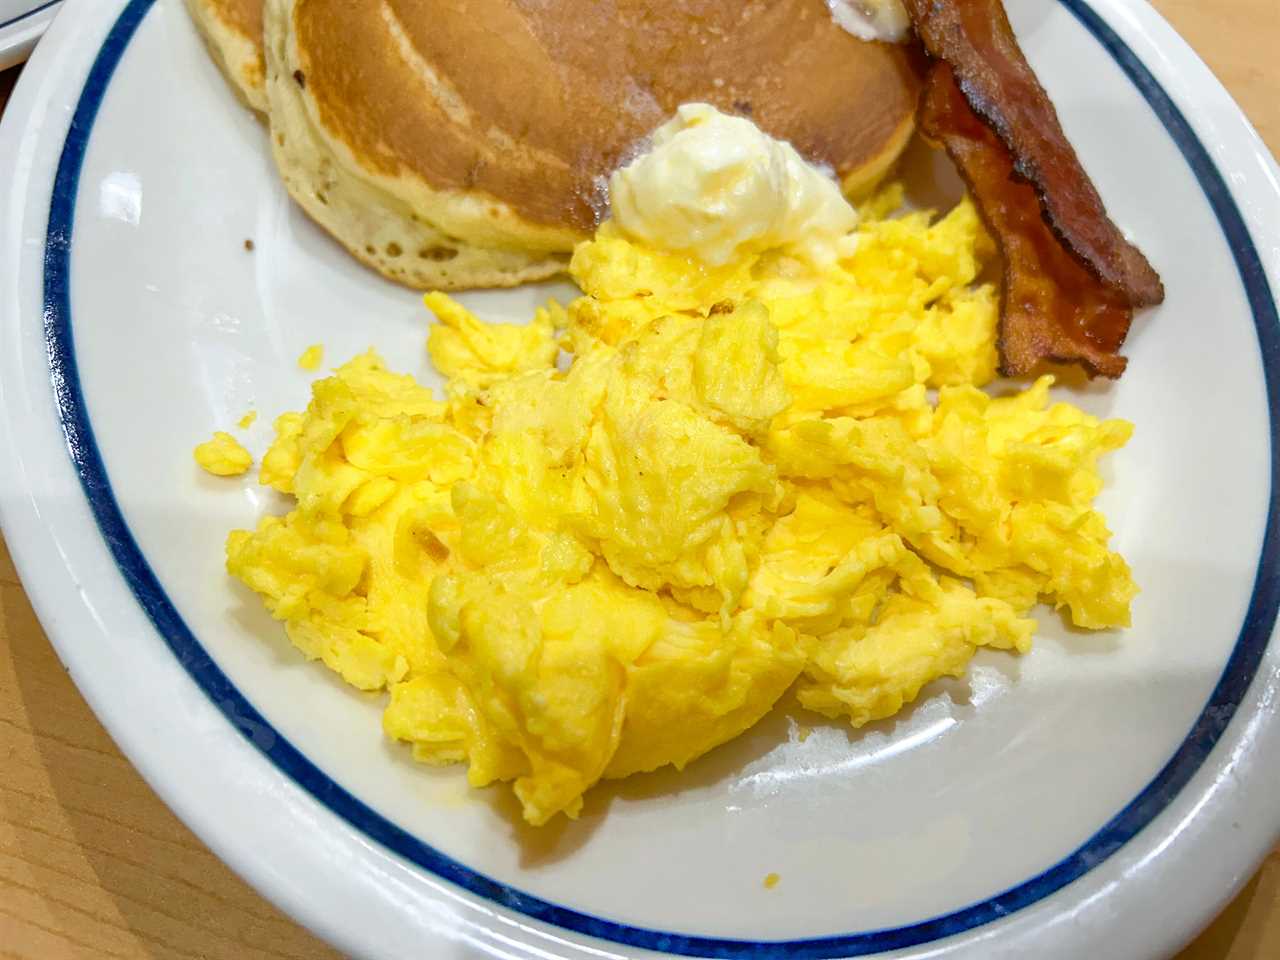 Scrambled eggs on a plate with a blue rim. Pancakes and bacon also sit on the plate